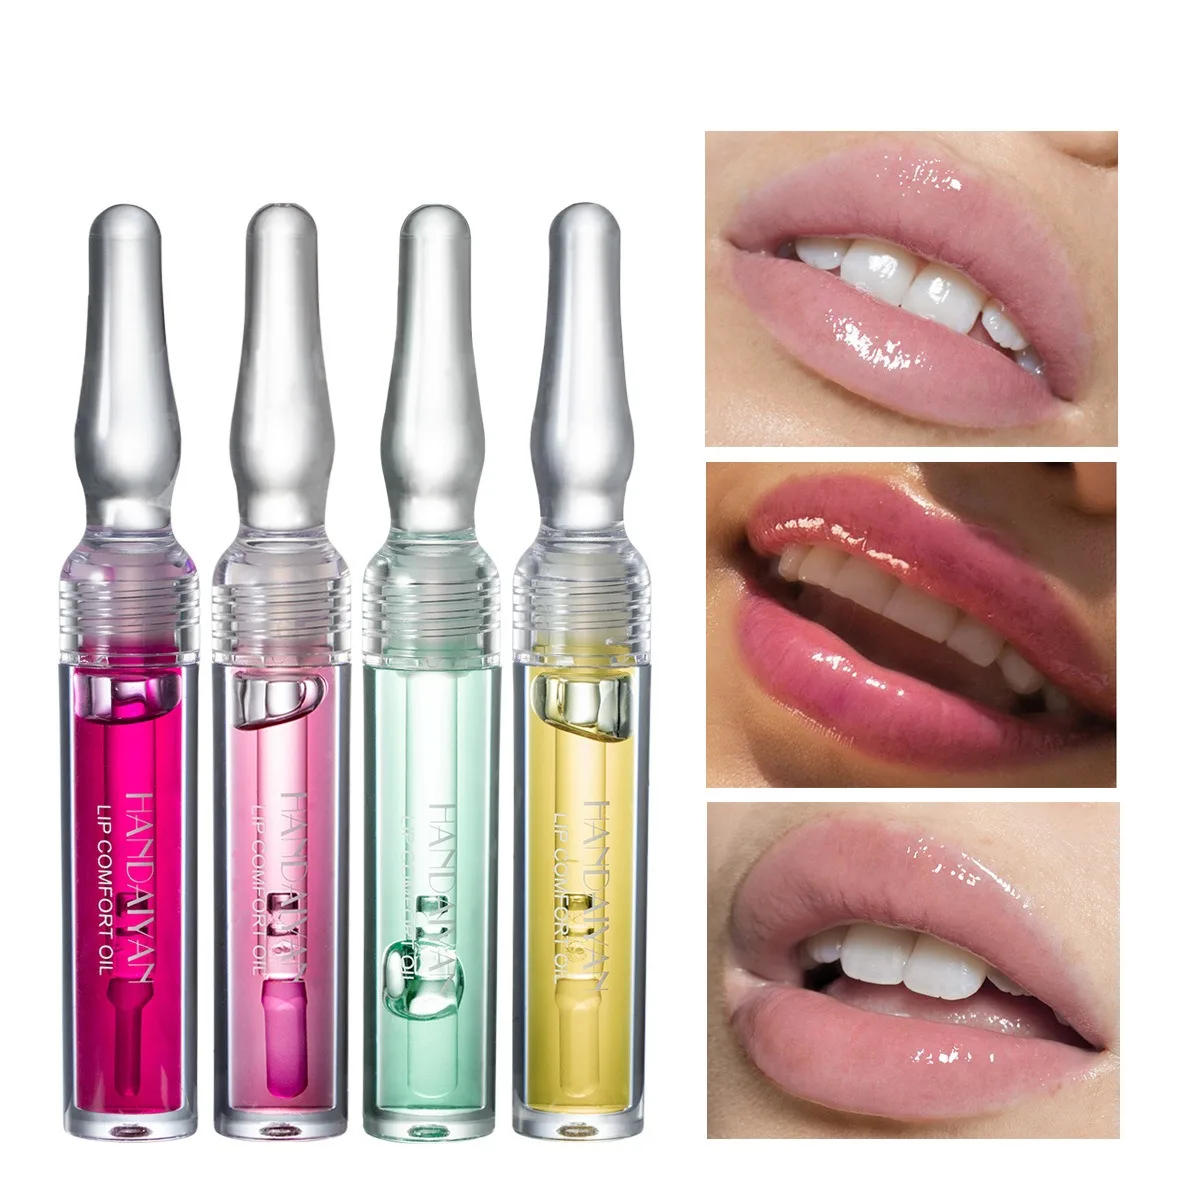 

7 Color Moisturizing Hydrating Lip Glaze Nutritious Pure Plant Oil Non-sticky Gloss Mirror-like Shine Nourishes Watery Lipgloss